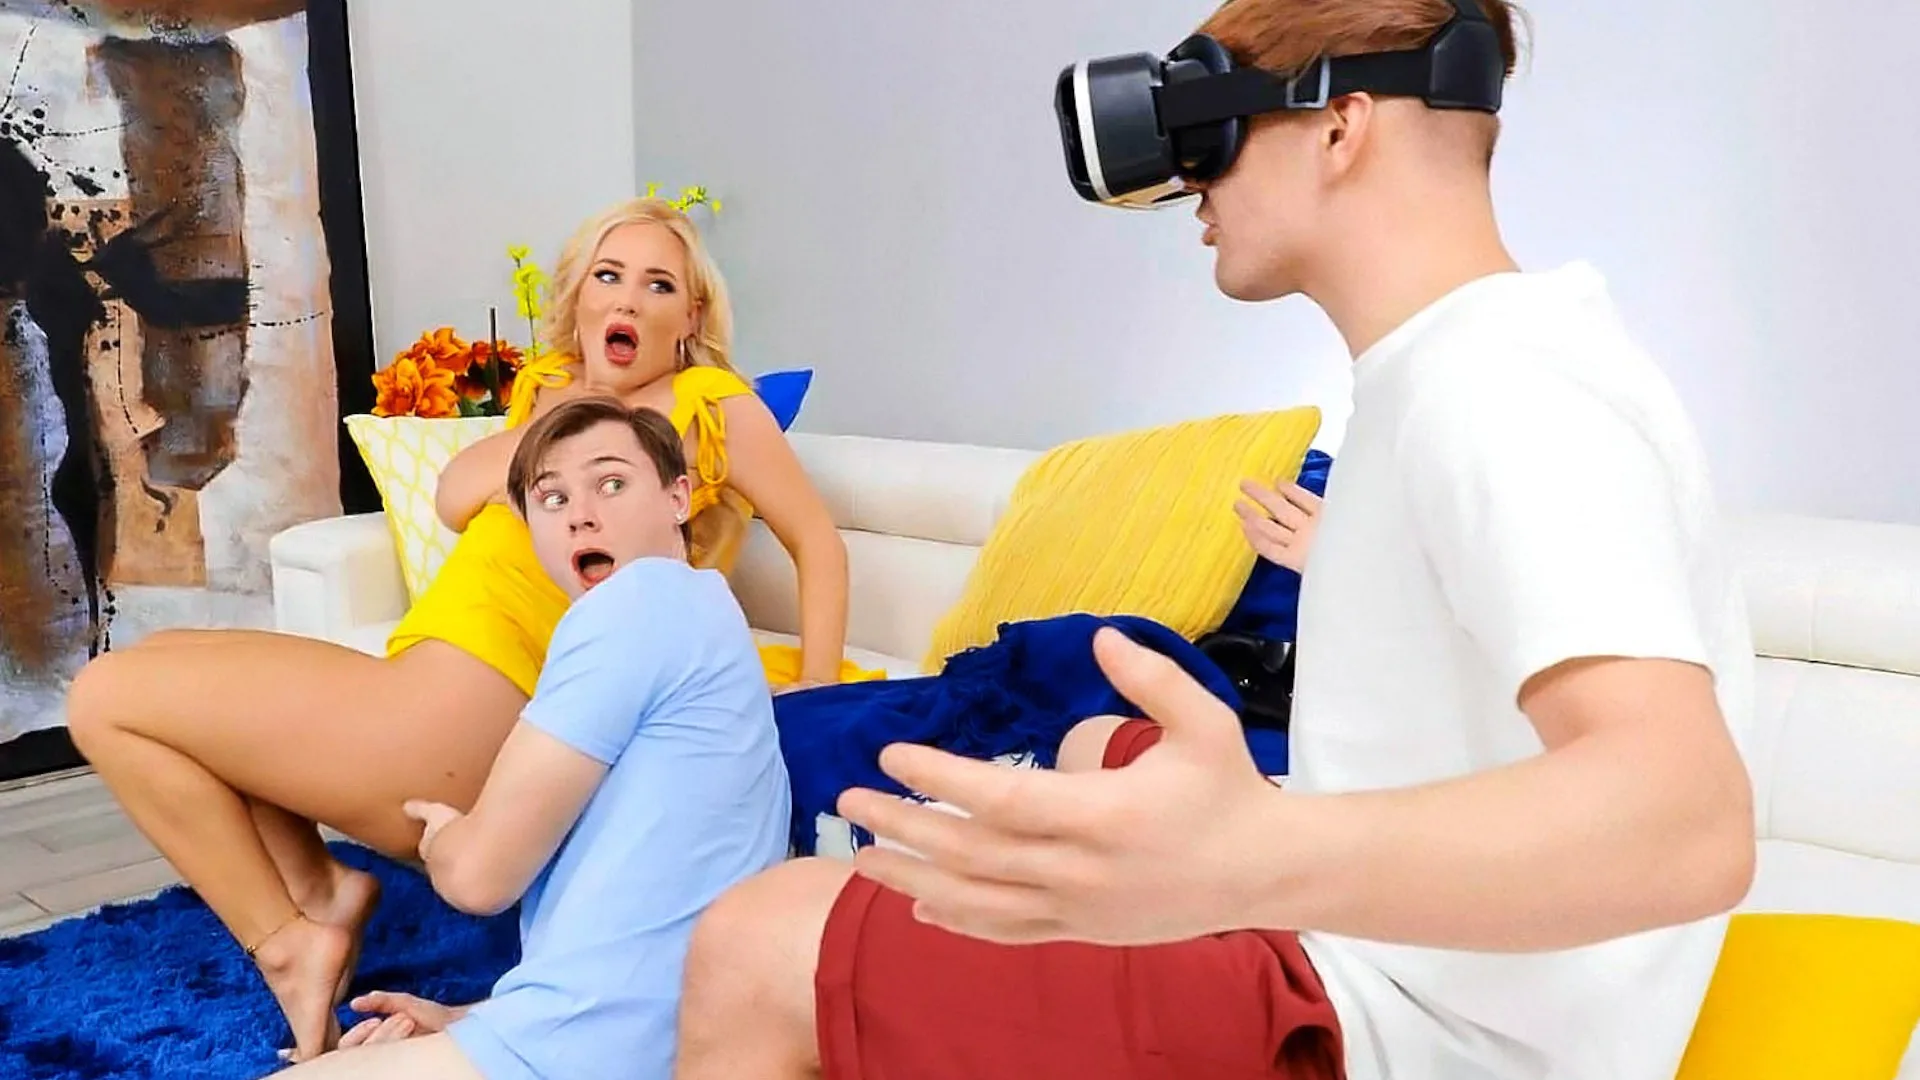 Pumped For VR!!! - Brazzers Exxtra